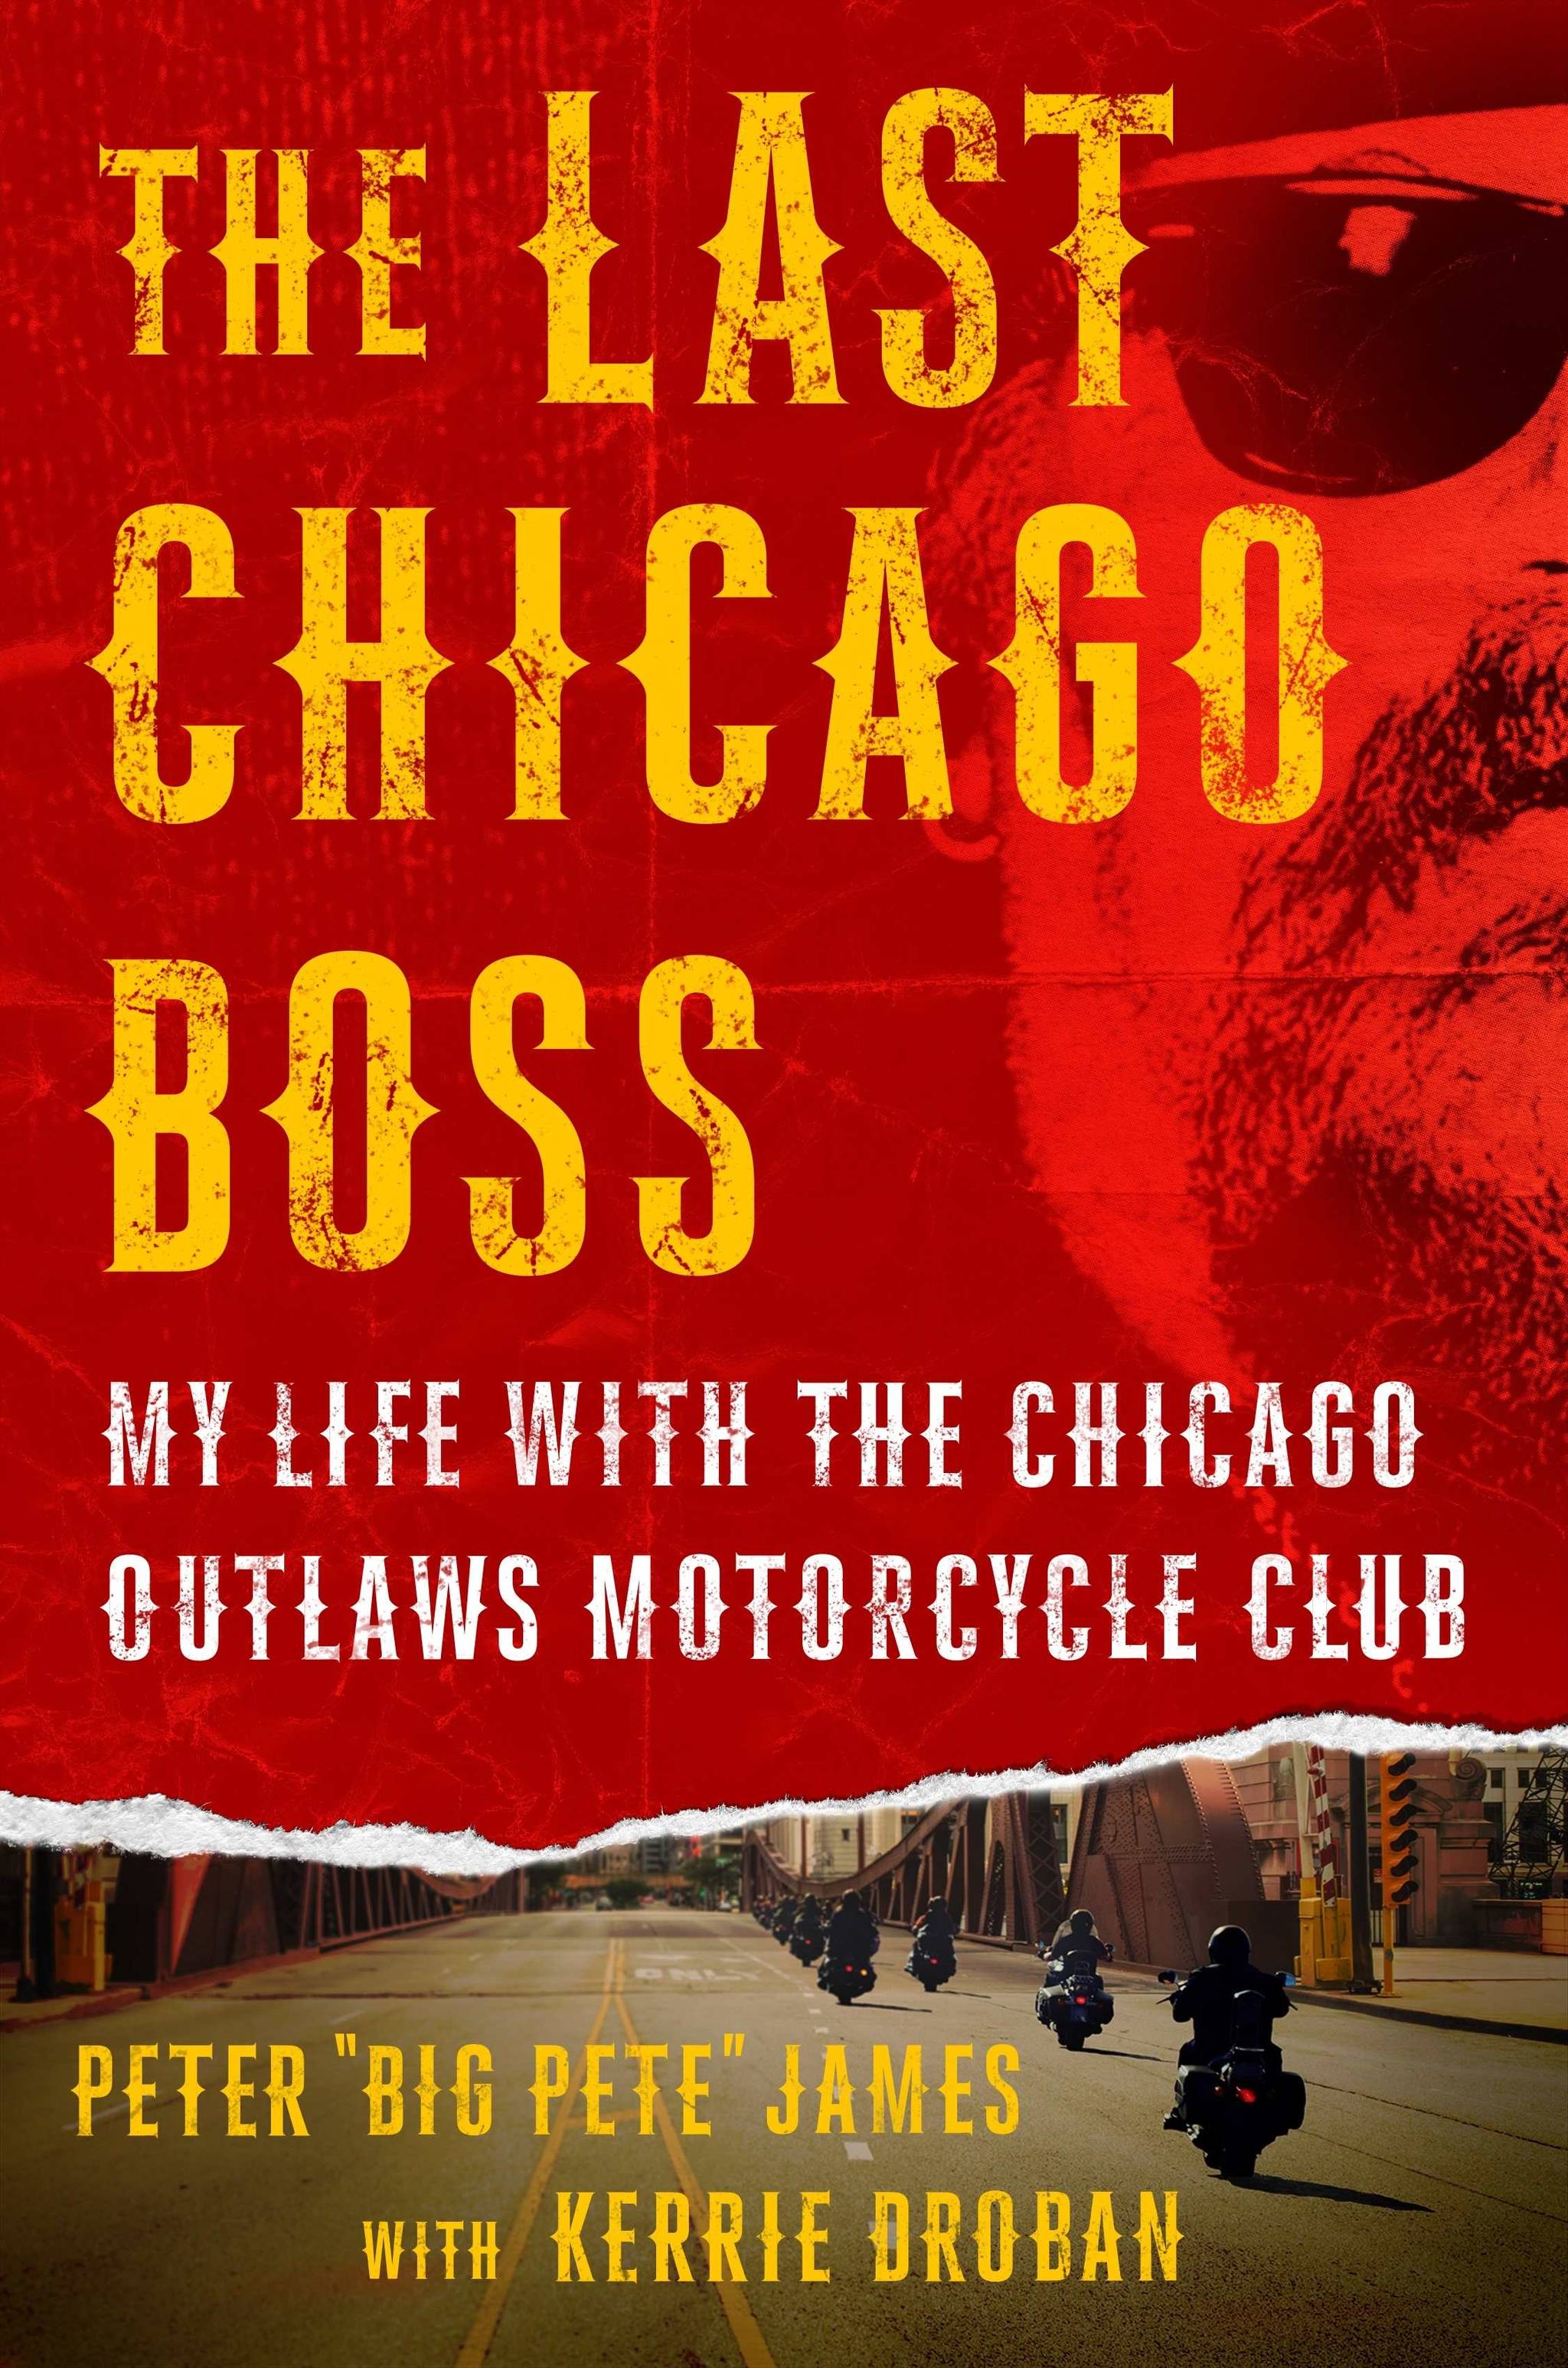 The Bookworm Sez: ‘Last Chicago Boss’ rides through whirlwind of crime